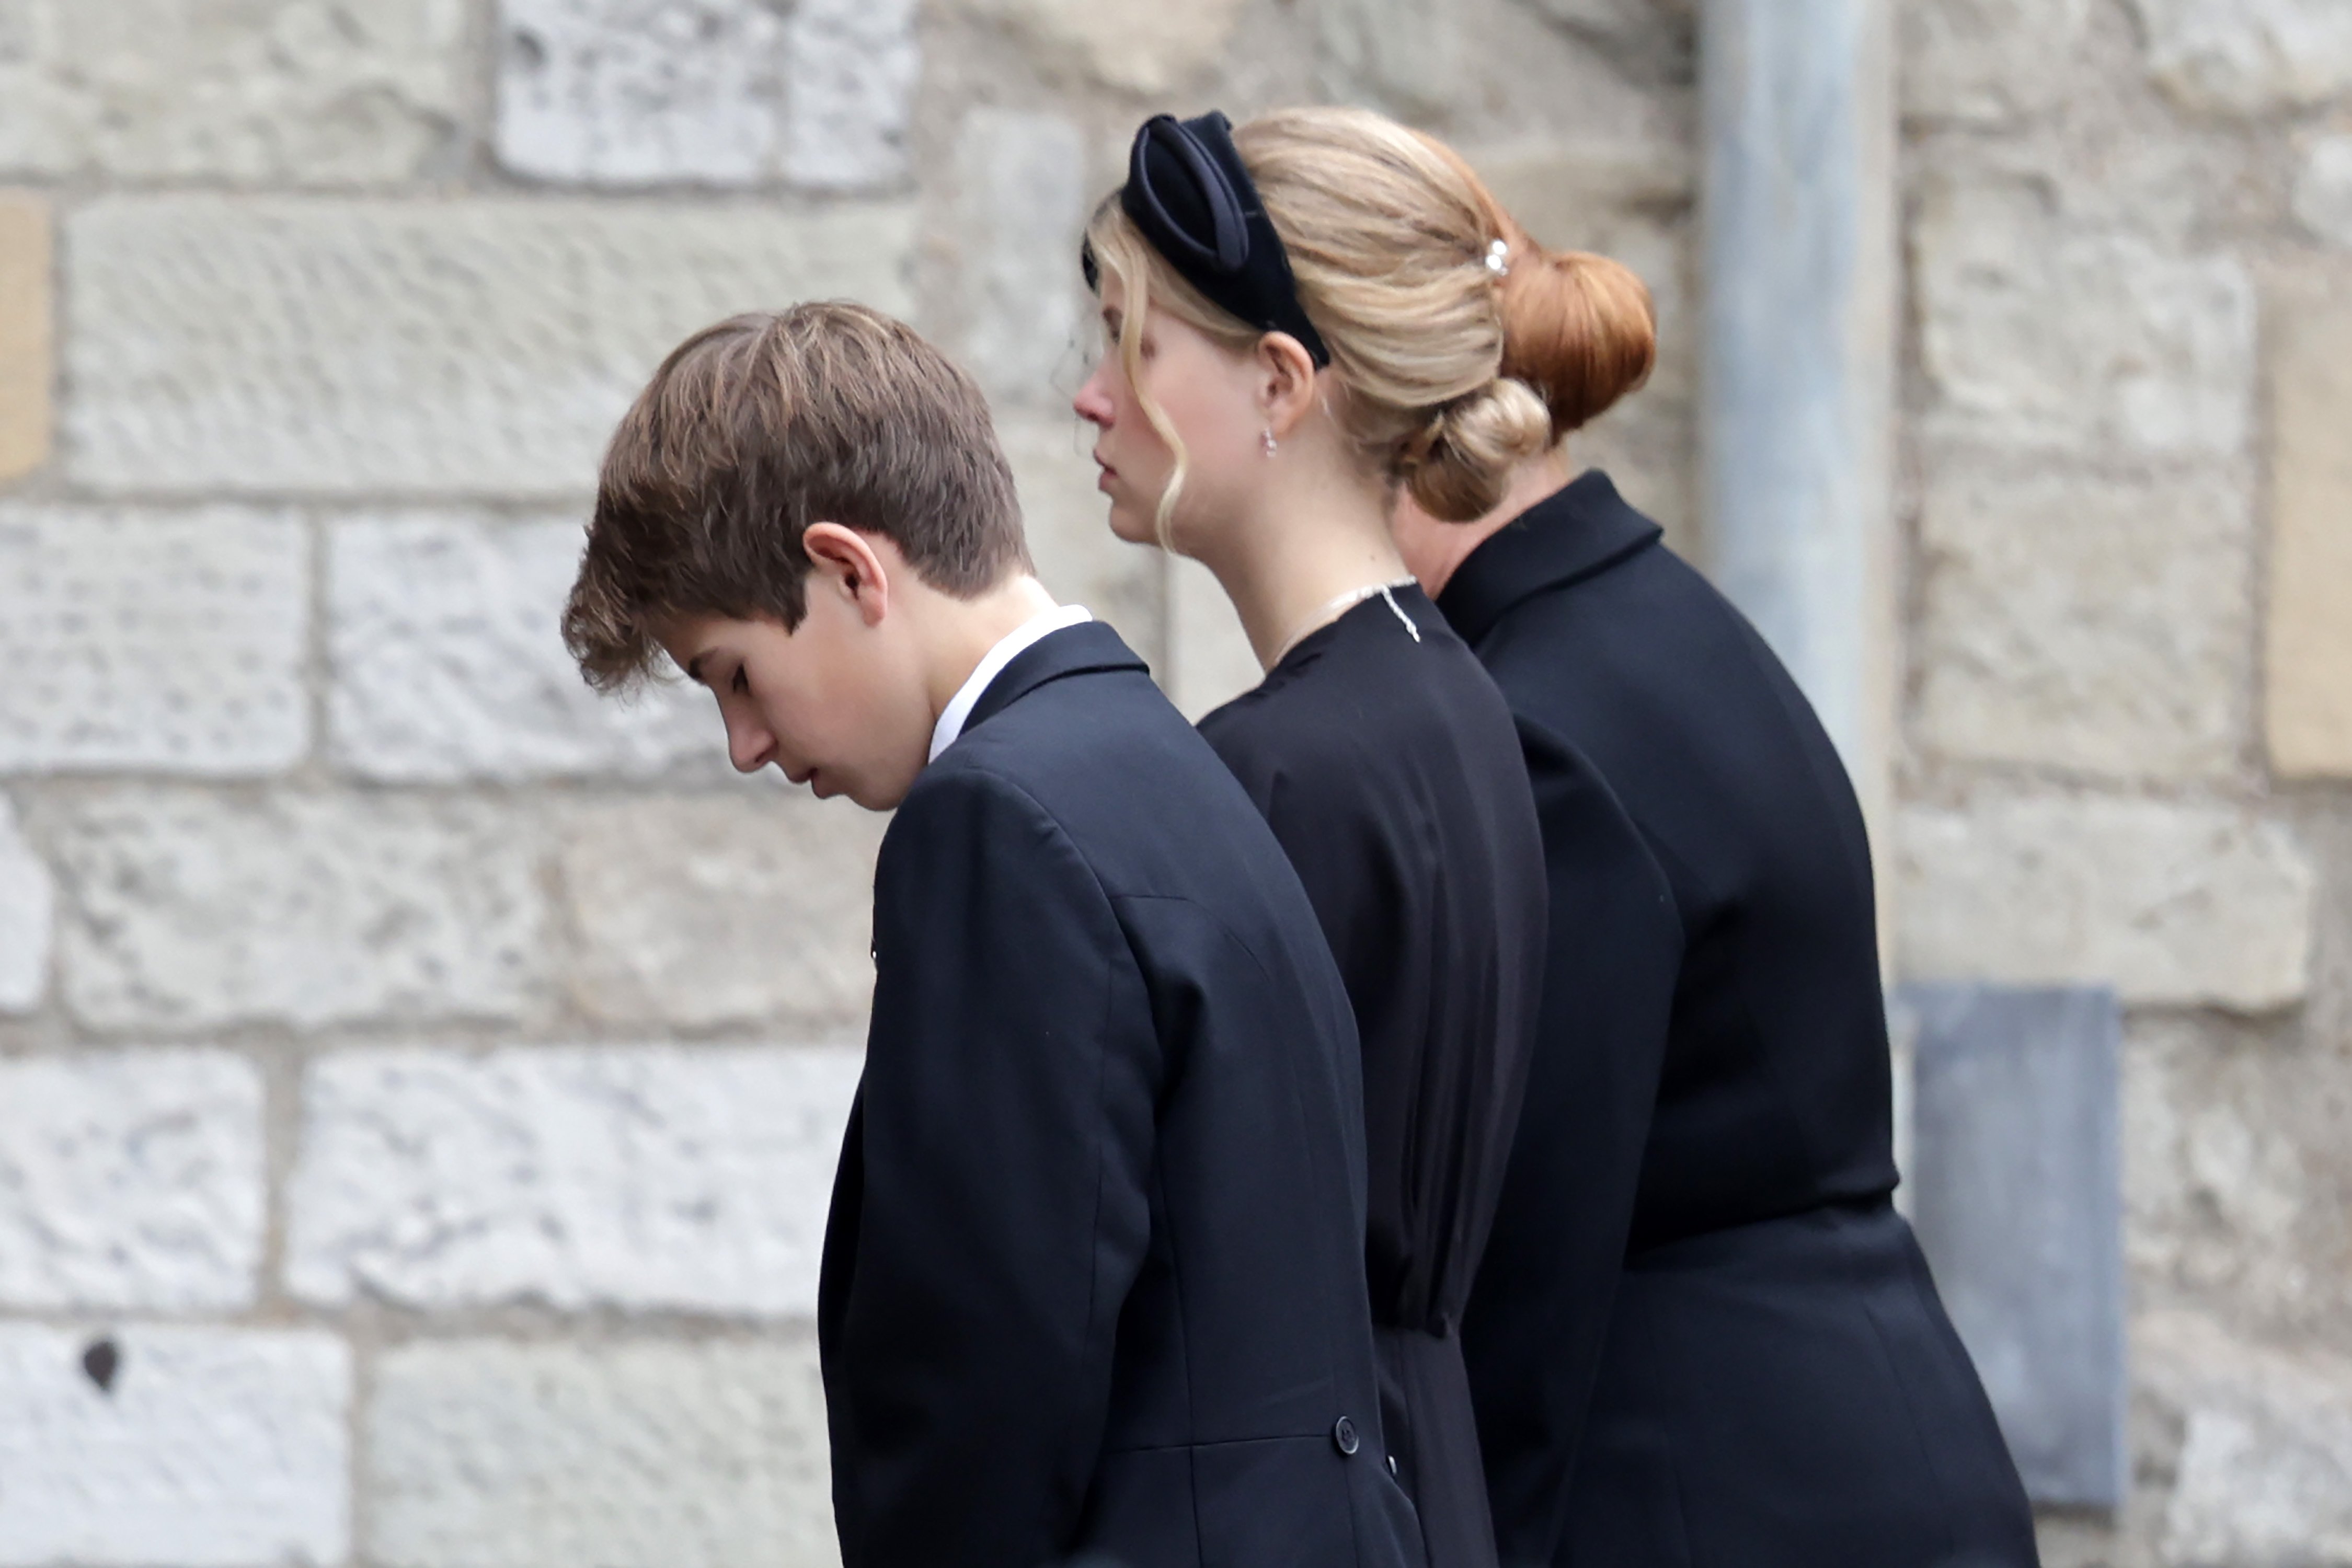 James, Viscount Severn and Lady Louise Windsor at Westminster Abbey for The State Funeral of Queen Elizabeth II on September 19, 2022 in London, England. | Source: Getty Images